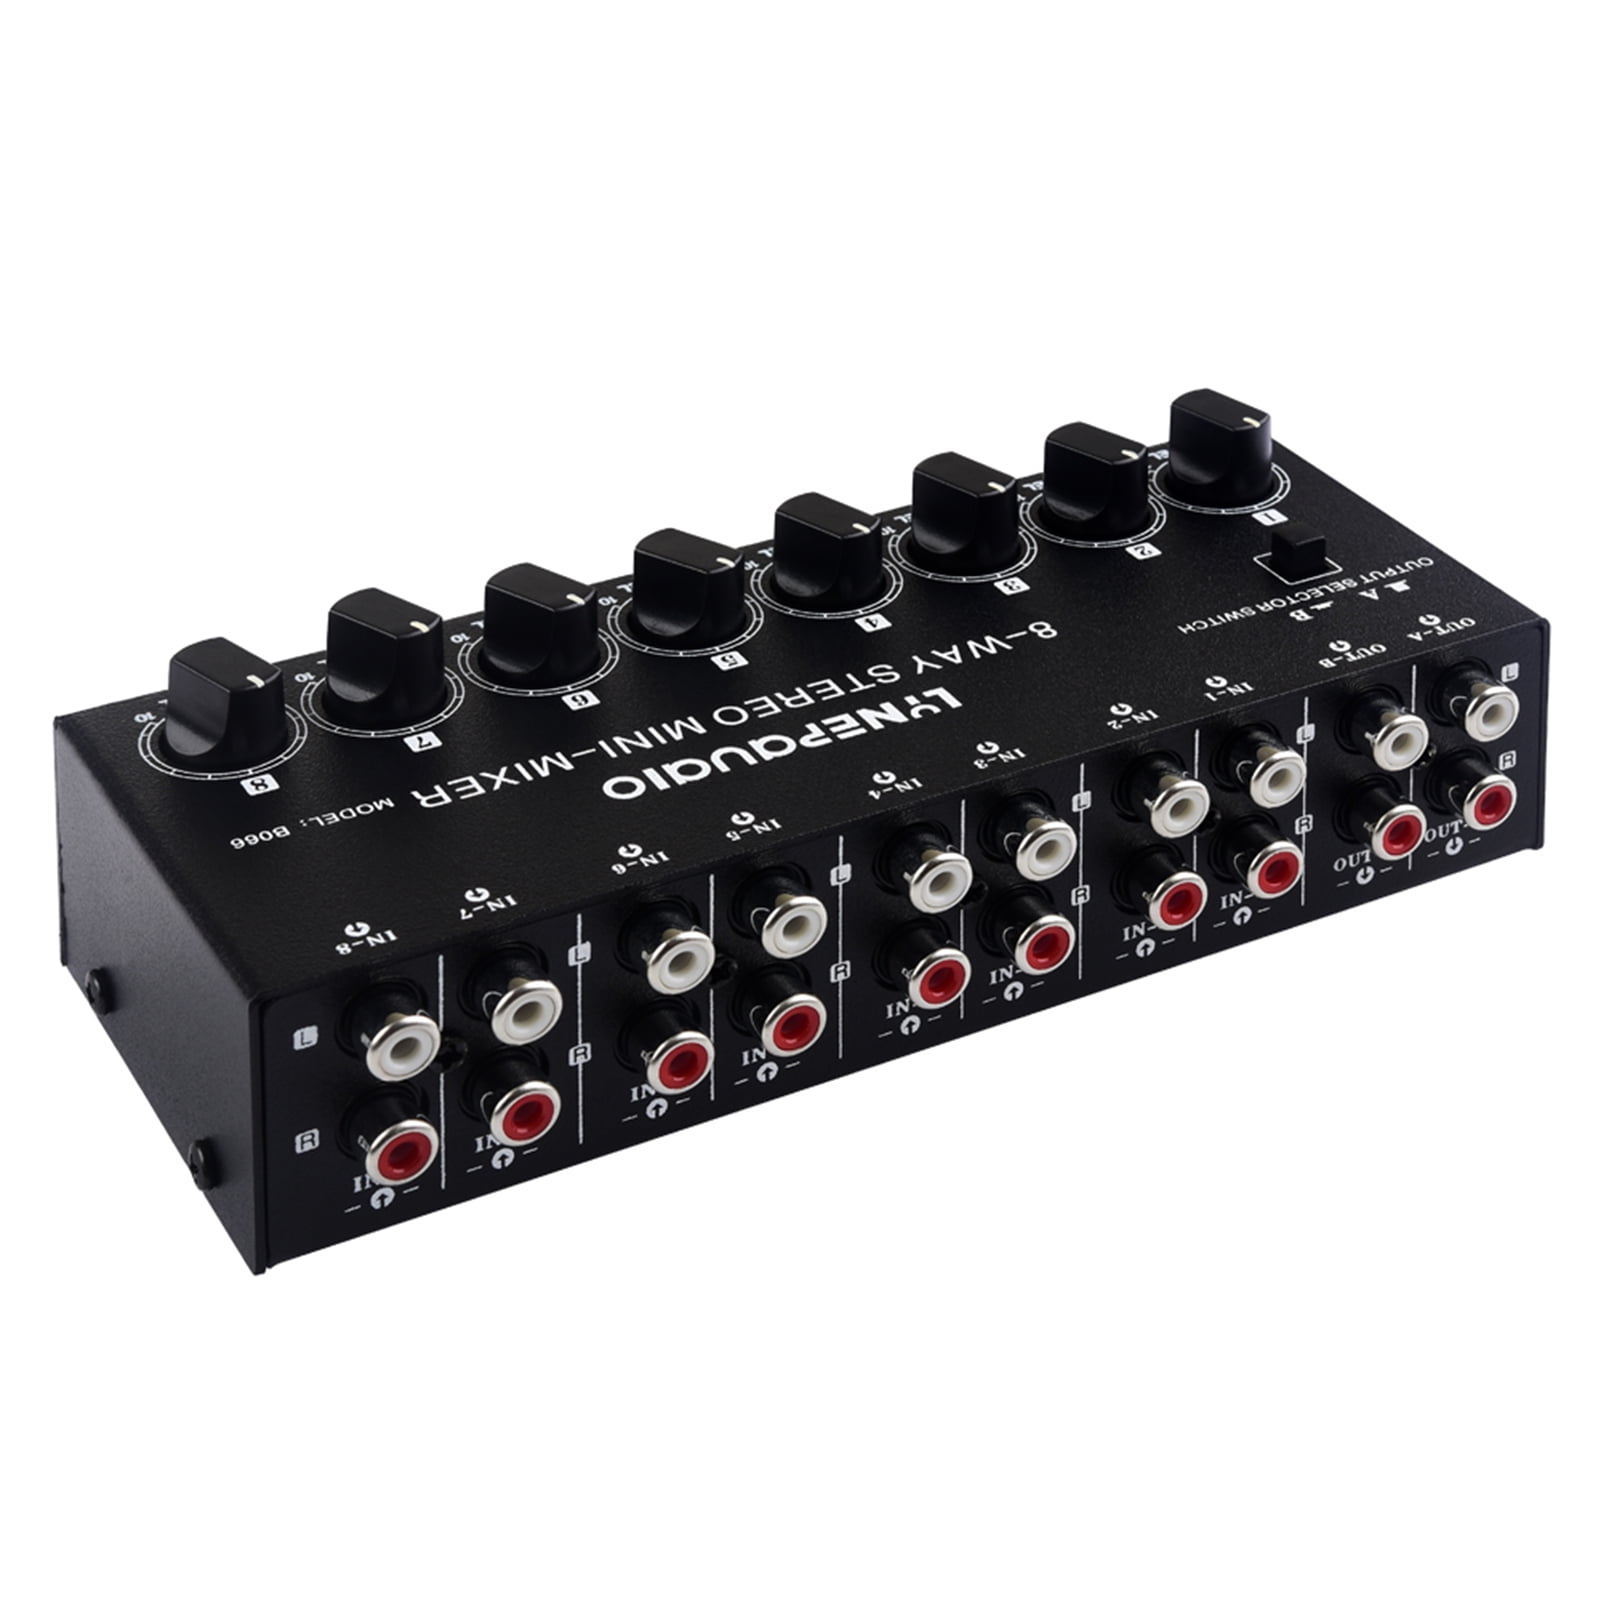 B066 Mini Stereo 8 Channel Passive Mixer RCA Portable Audio Mixer 8 in 2 out Stereo Distributor Control, No External Power Required - Walmart.com